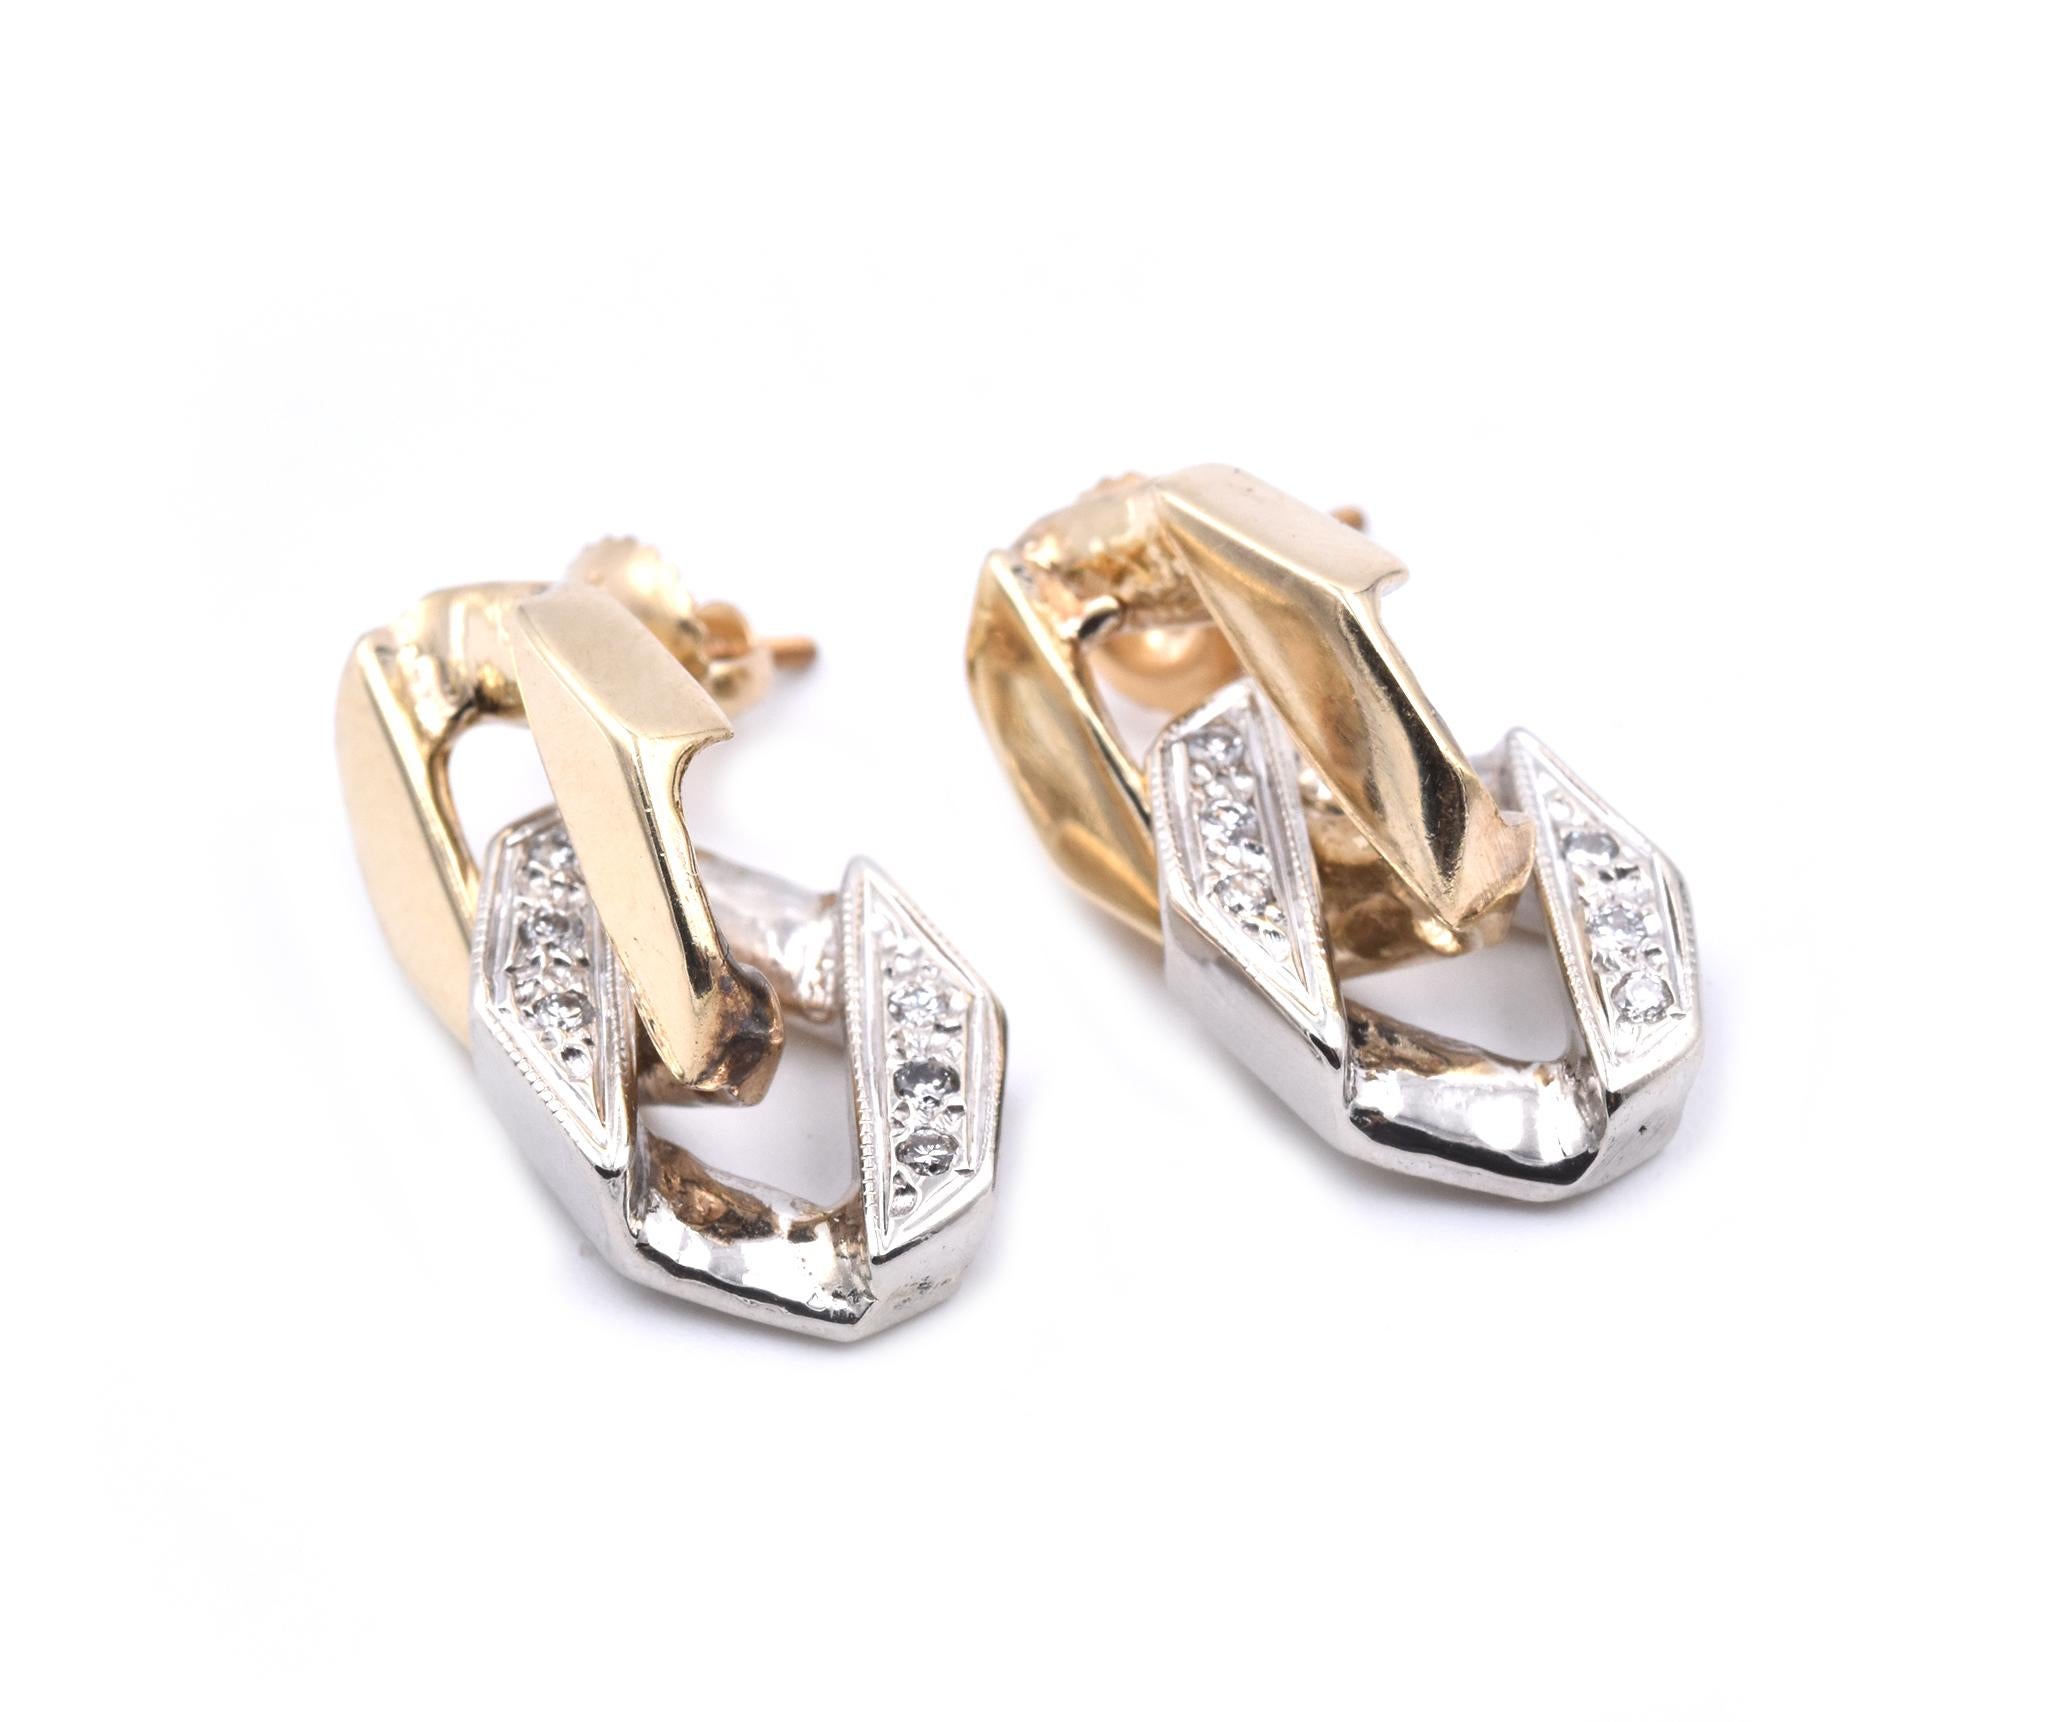 Material: 14k white and yellow gold
Diamonds: 12 round brilliant cuts = .12cttw
Color: G
Clarity: SI1
Dimensions: earrings measure 24.5mm x 10.3mm
Fastenings: screw backs
Weight: 9.18 grams
